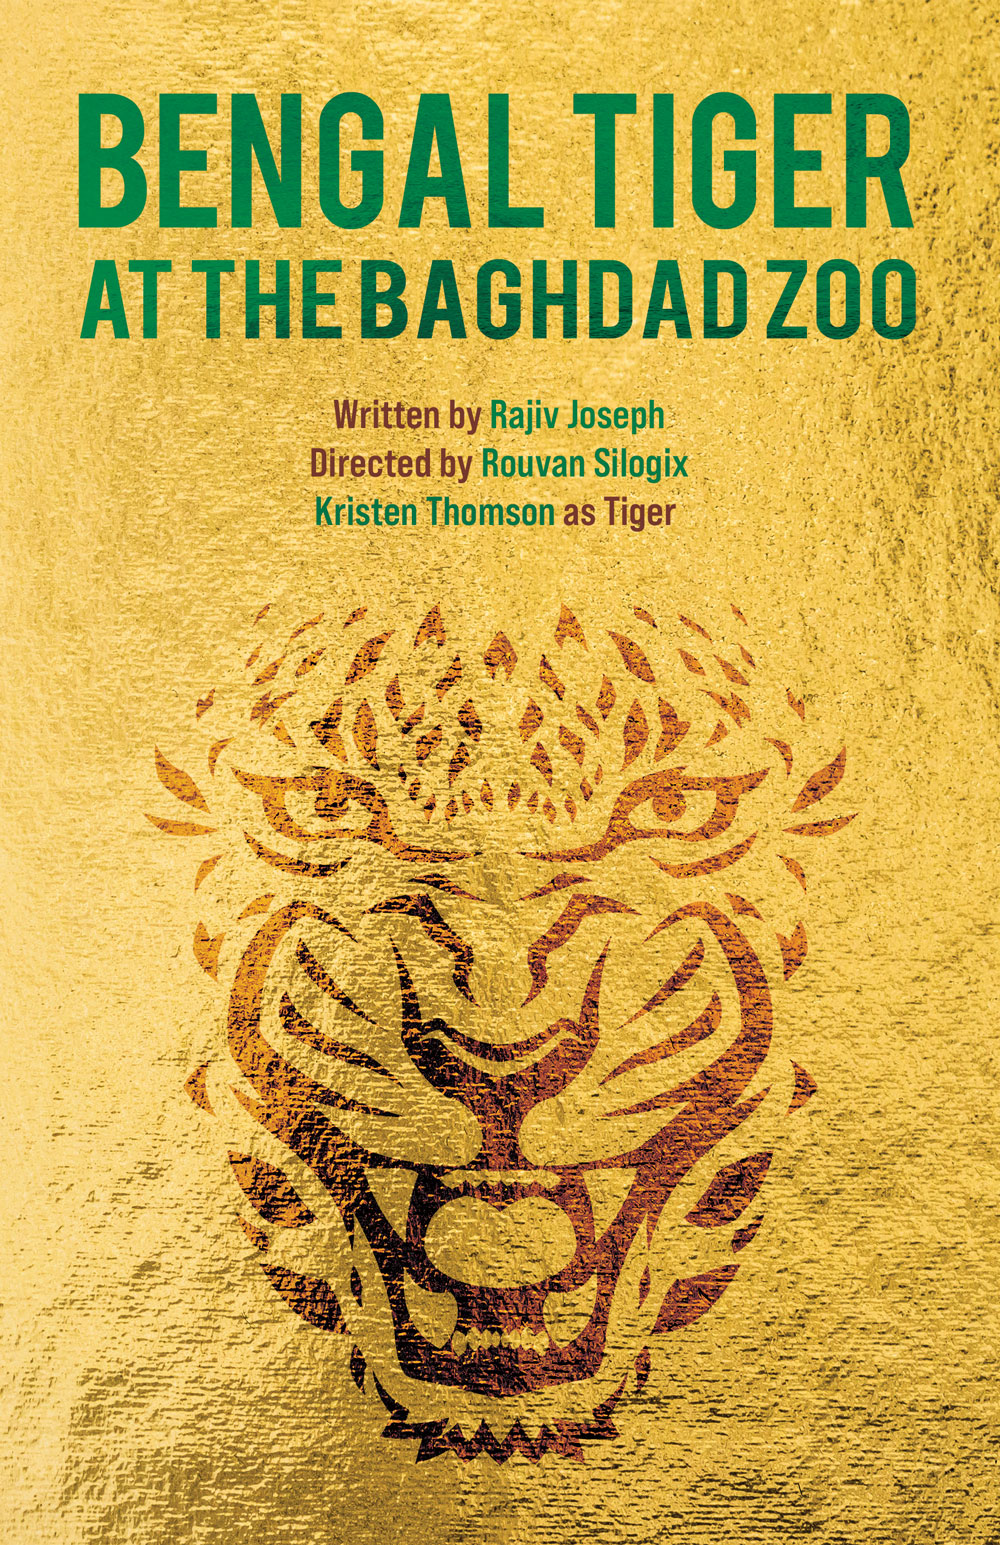 Crow's Theatre Bengal Tiger at the Baghdad Zoo - designed by Light Up the Sky.